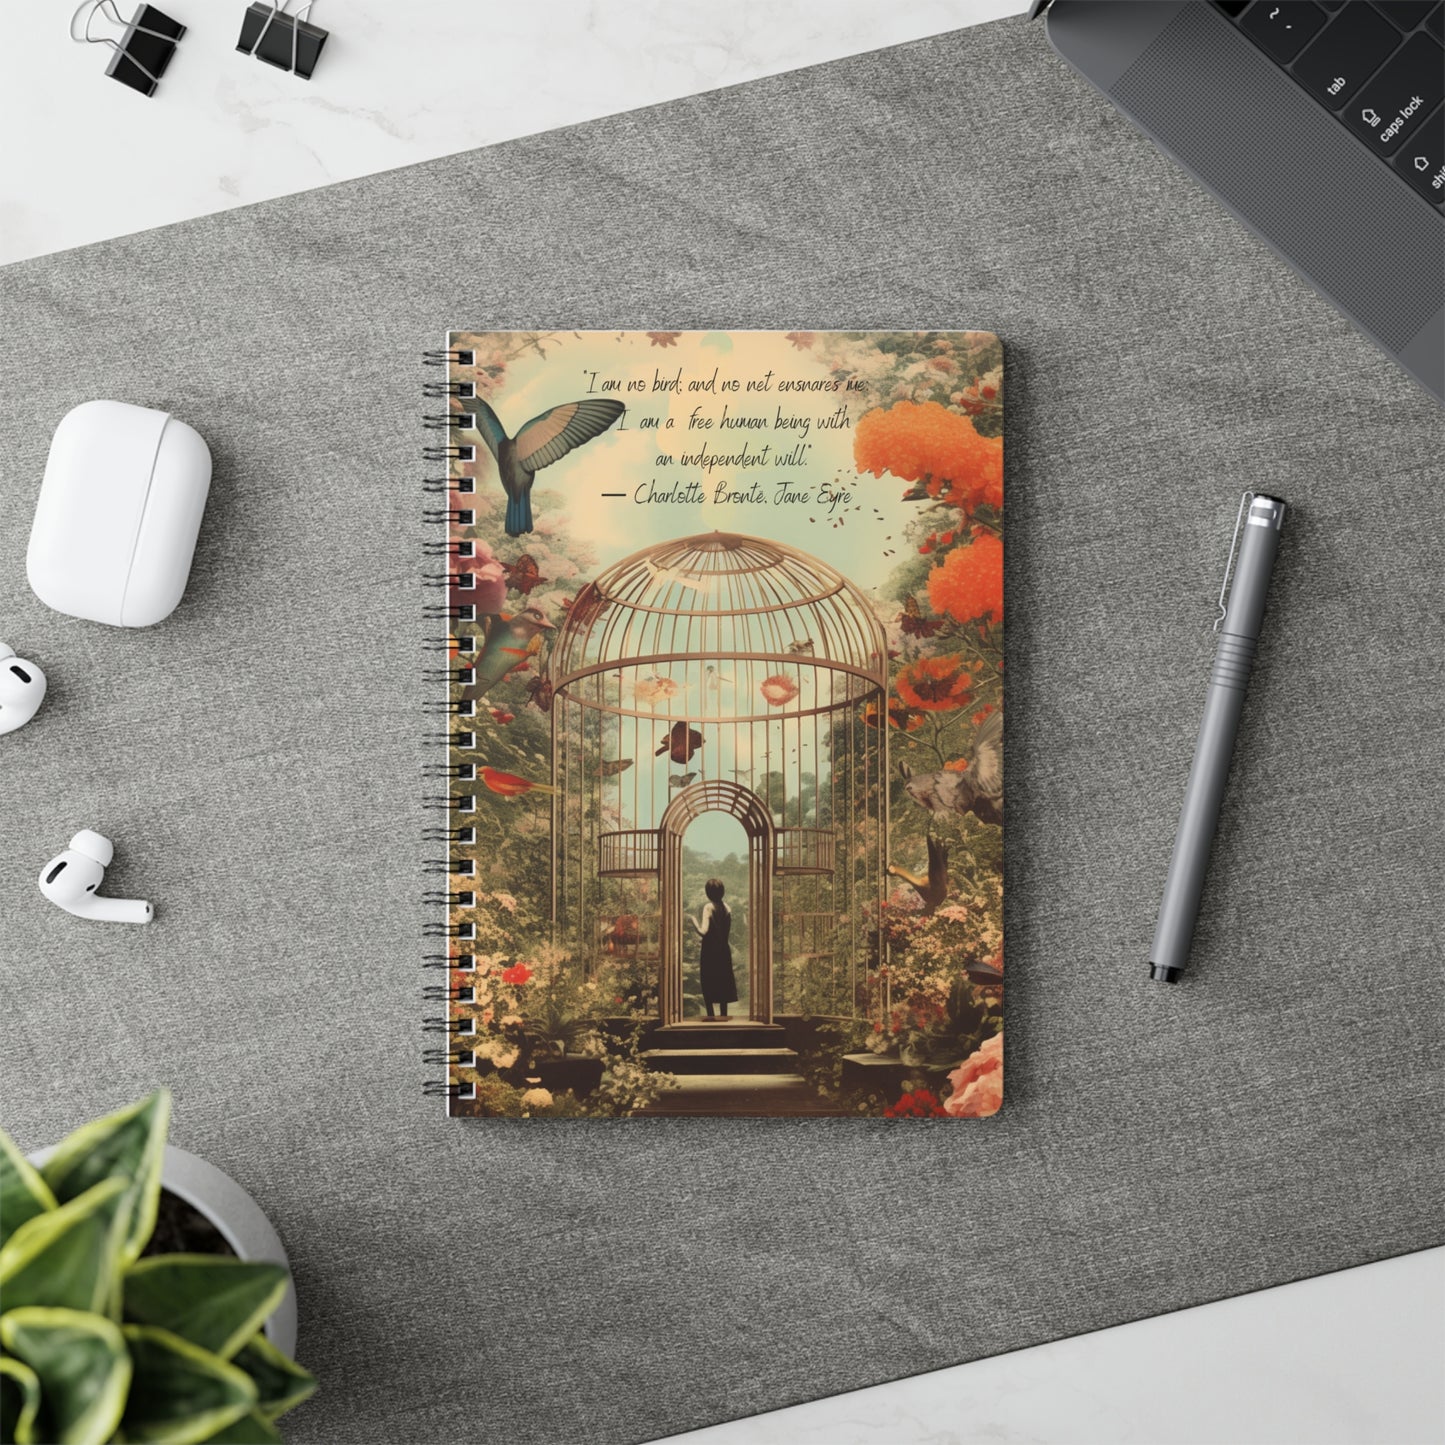 Charlotte Bronte, Jane Eyre Quote Softcover Notebook, A5